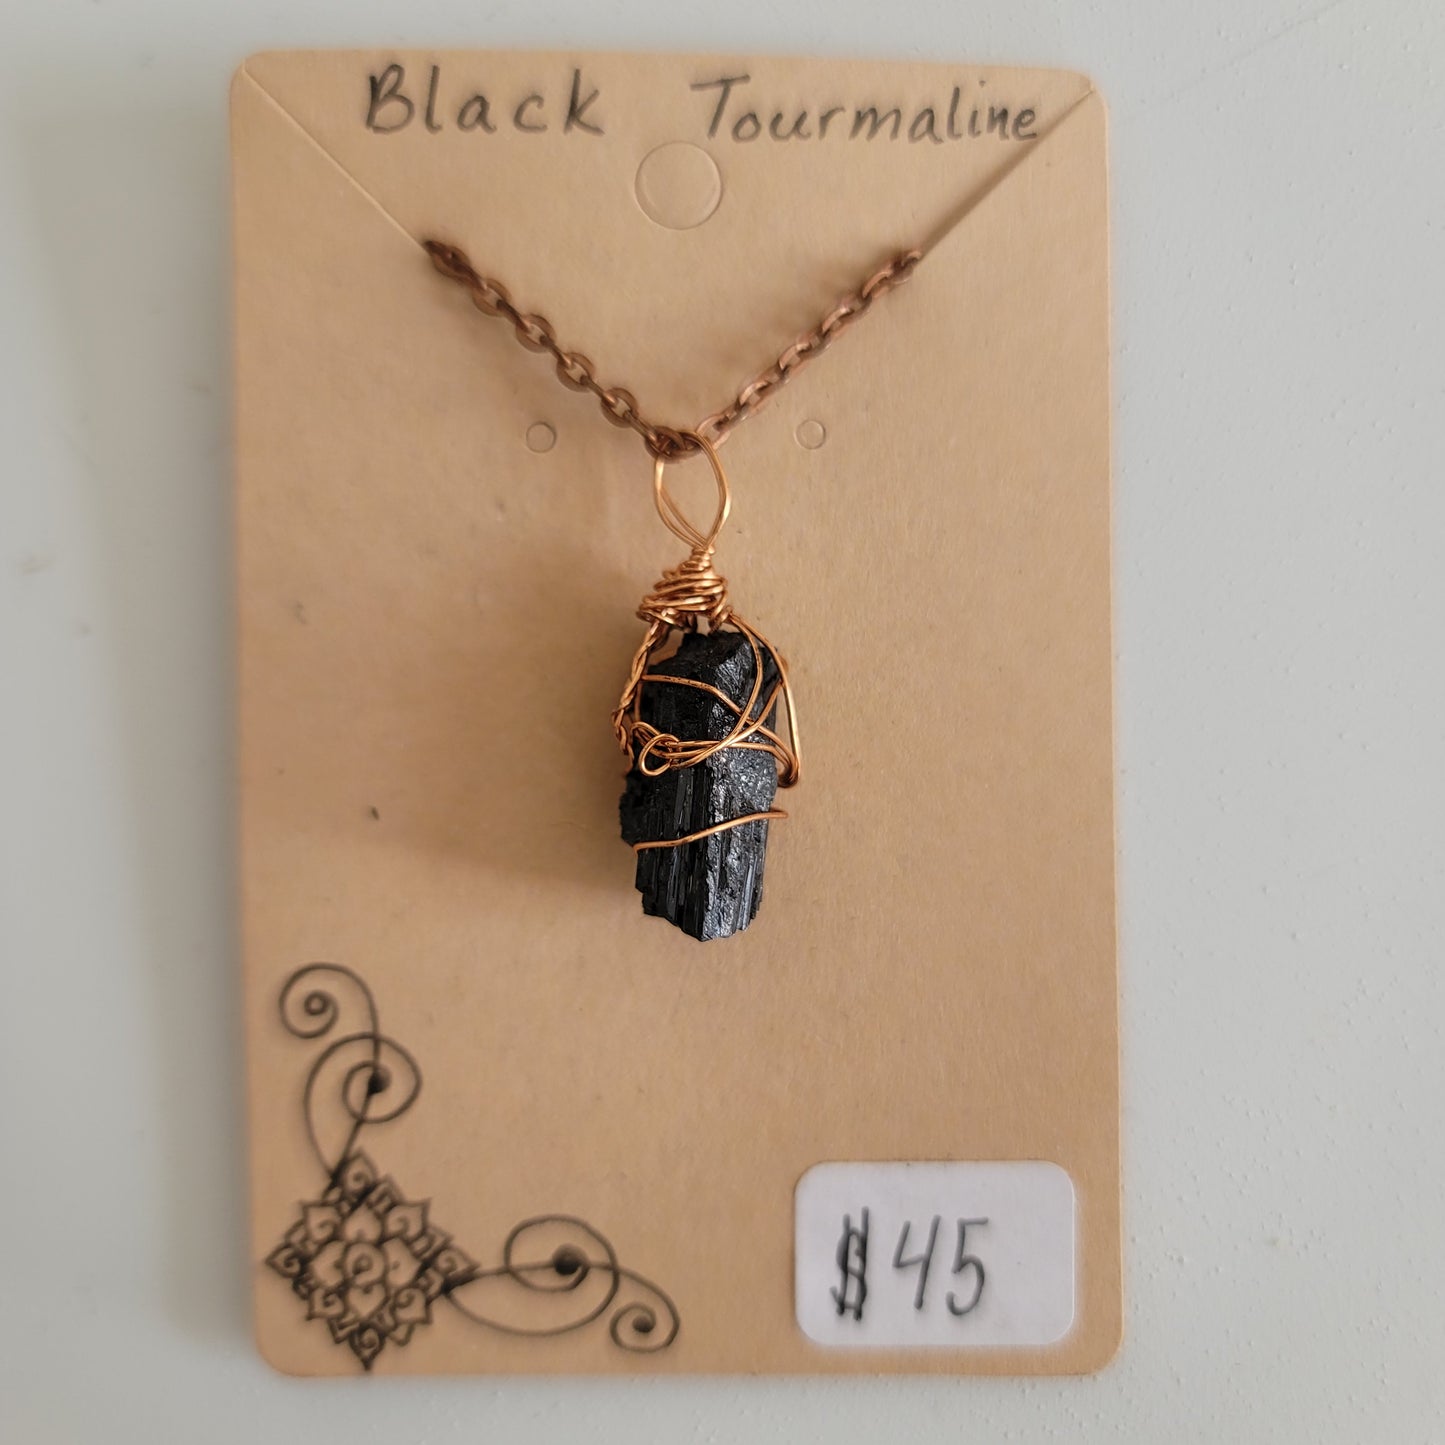 Black Tourmaline Crystal Necklace | Root Chakra| Protection| Block Negative Energy | Hand Wrapped and Reiki Blessed Jewelry